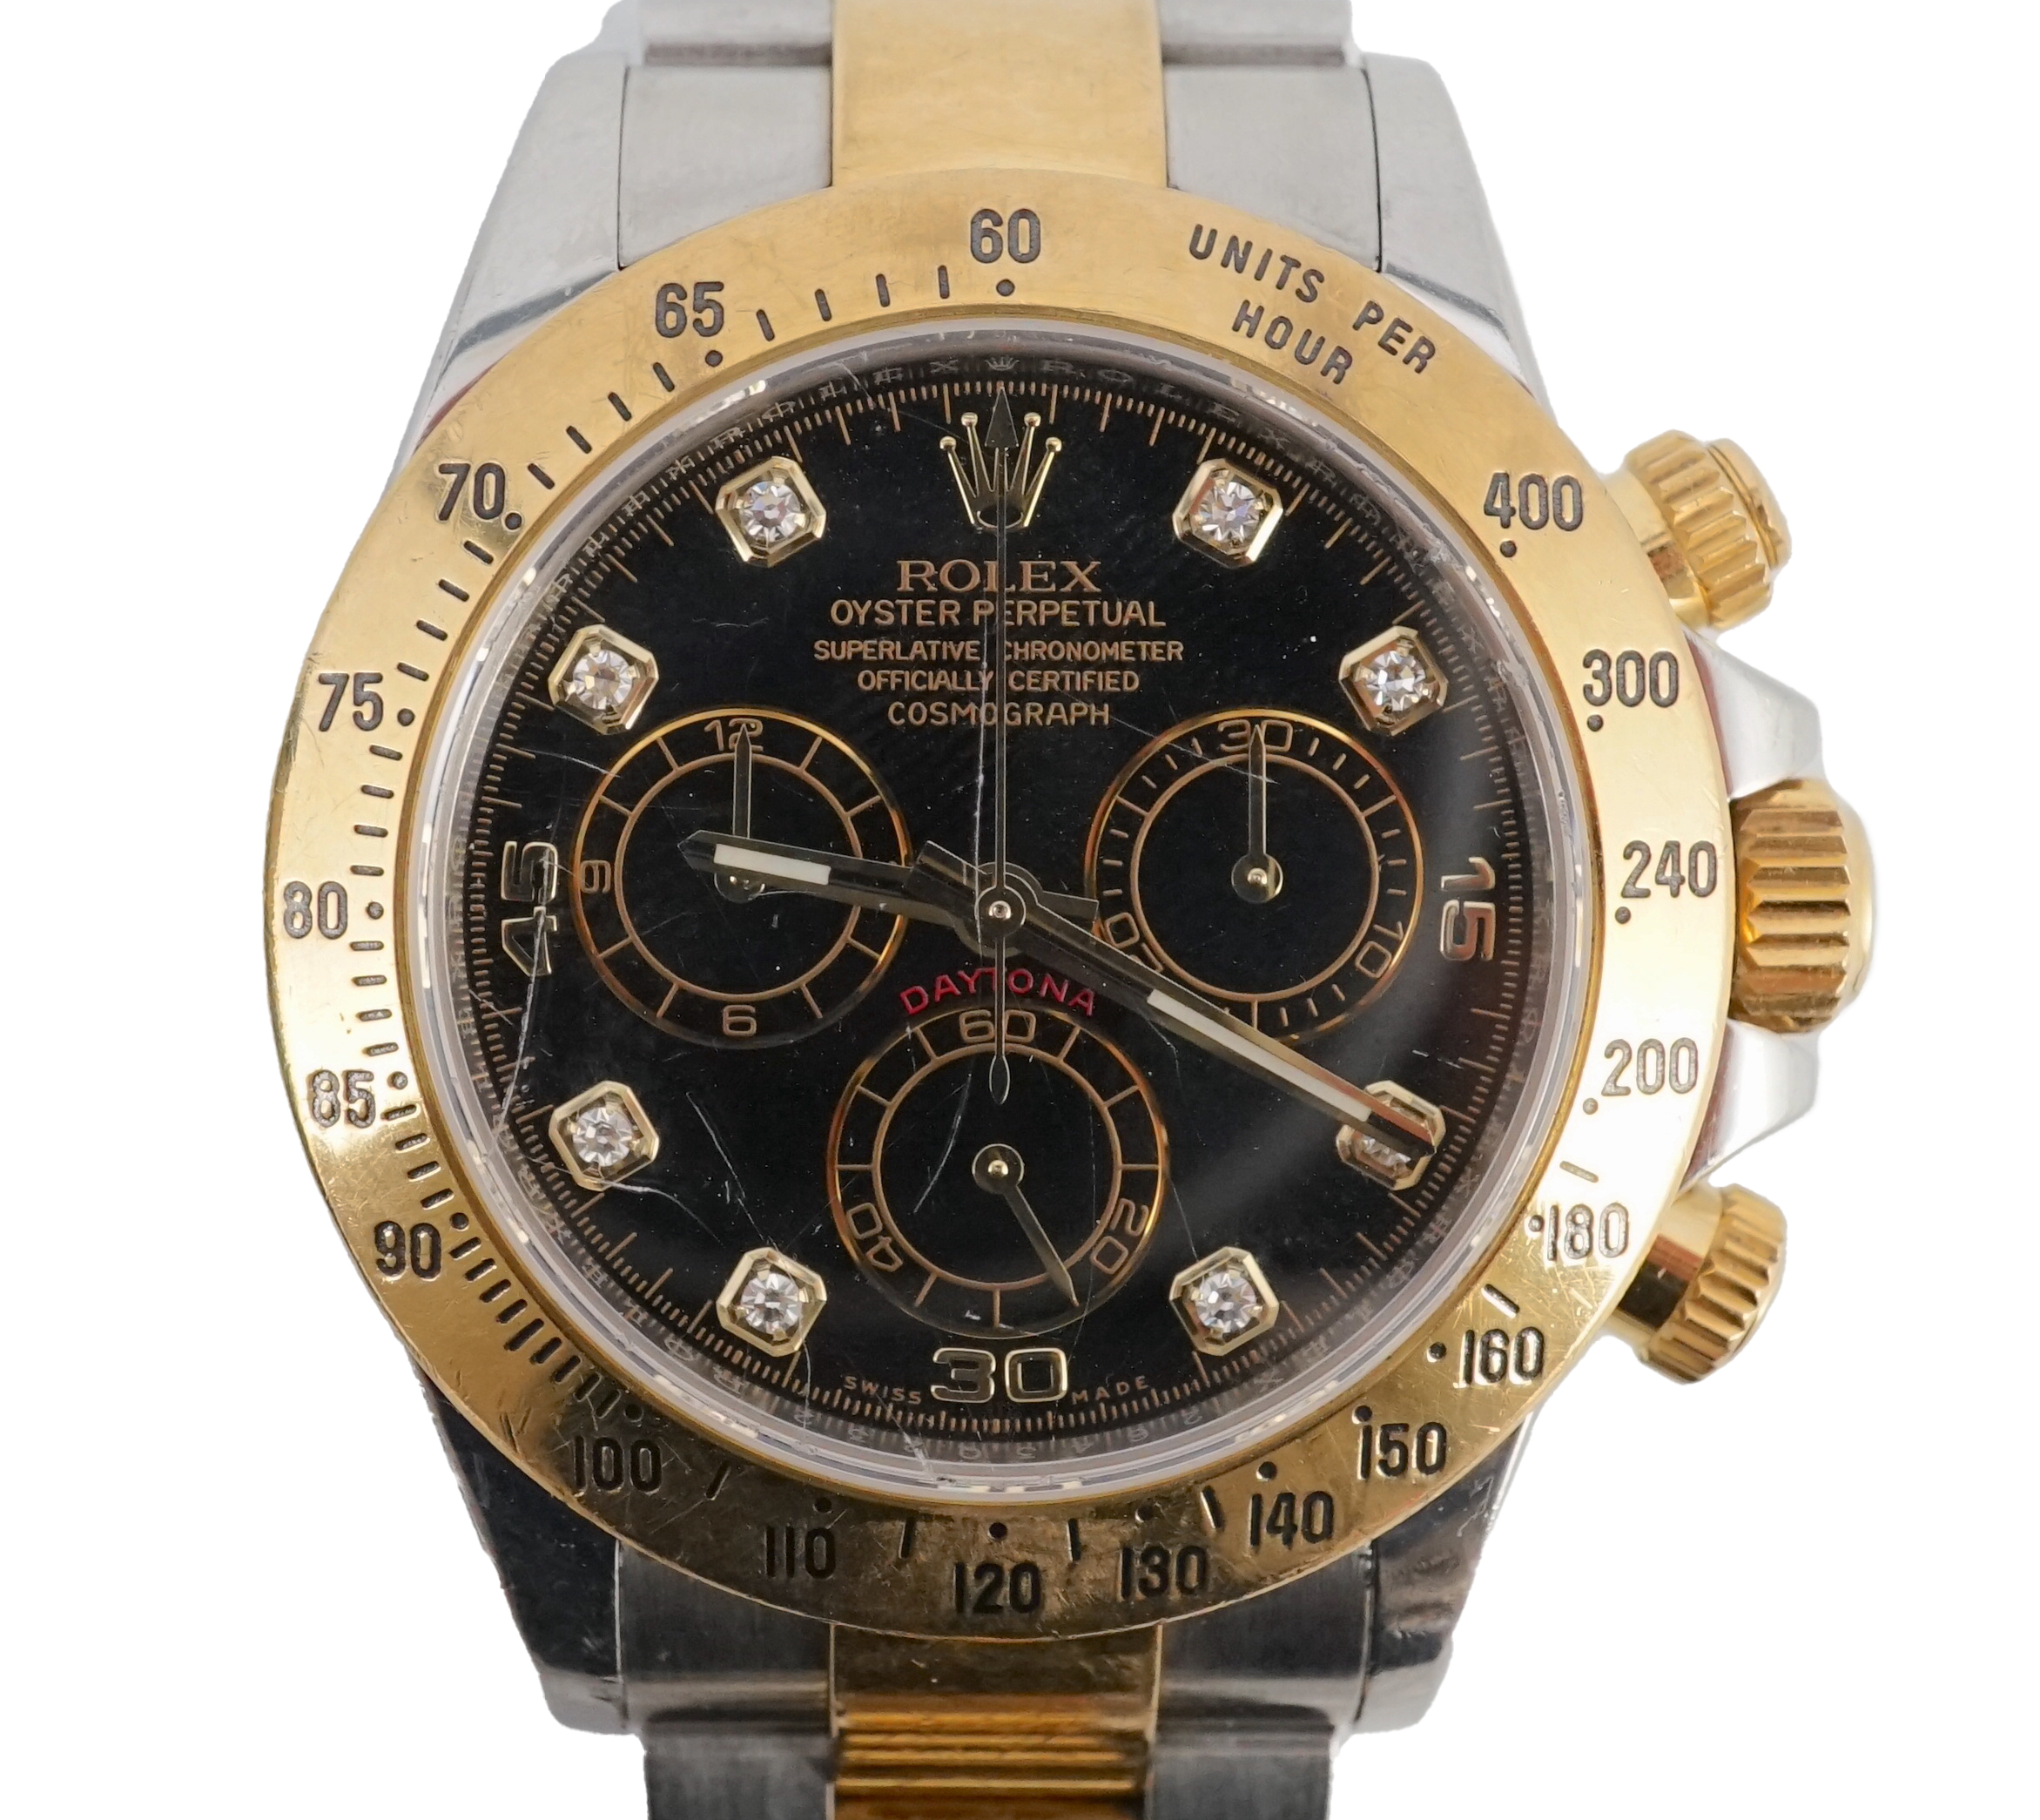 A gentleman's 2015 18ct gold and stainless steel Rolex Oyster Perpetual Daytona Cosmograph wrist watch, on an 18ct gold and stainless steel Rolex bracelet